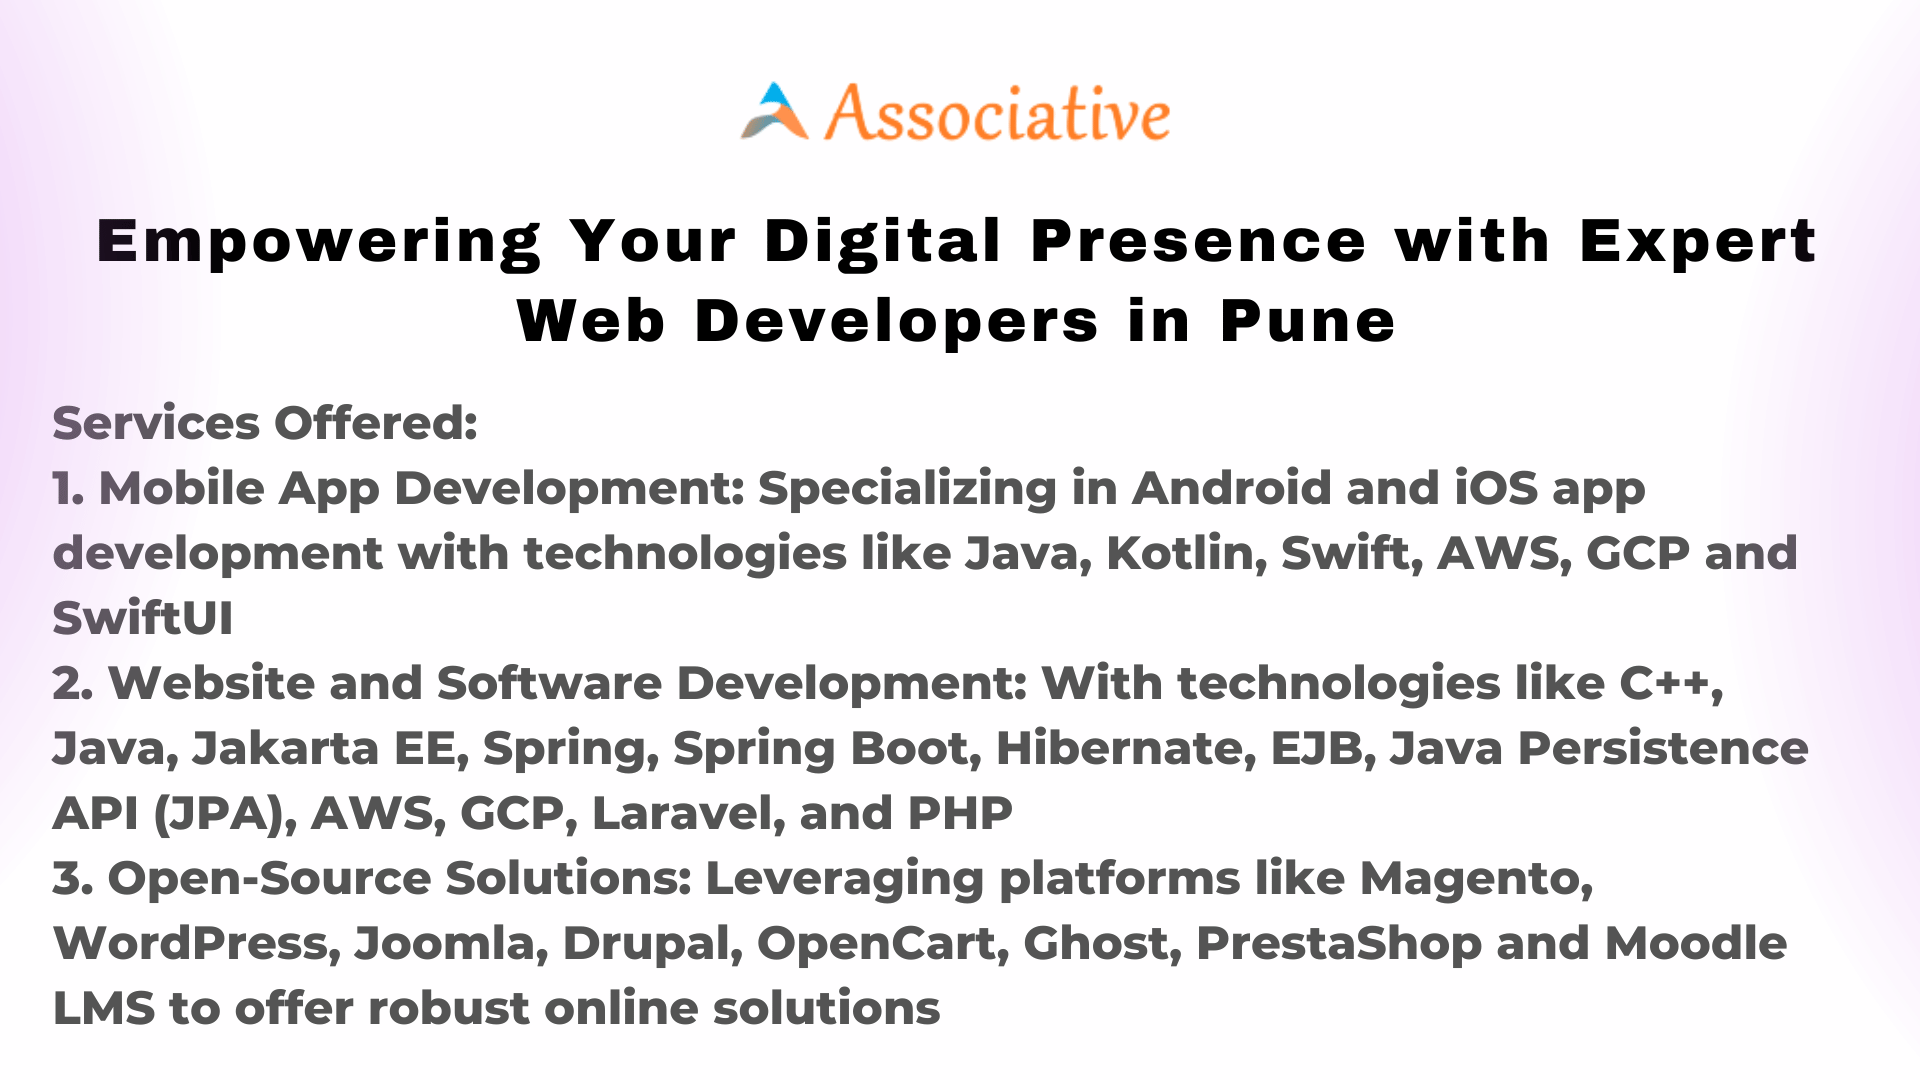 Empowering Your Digital Presence with Expert Web Developers in Pune